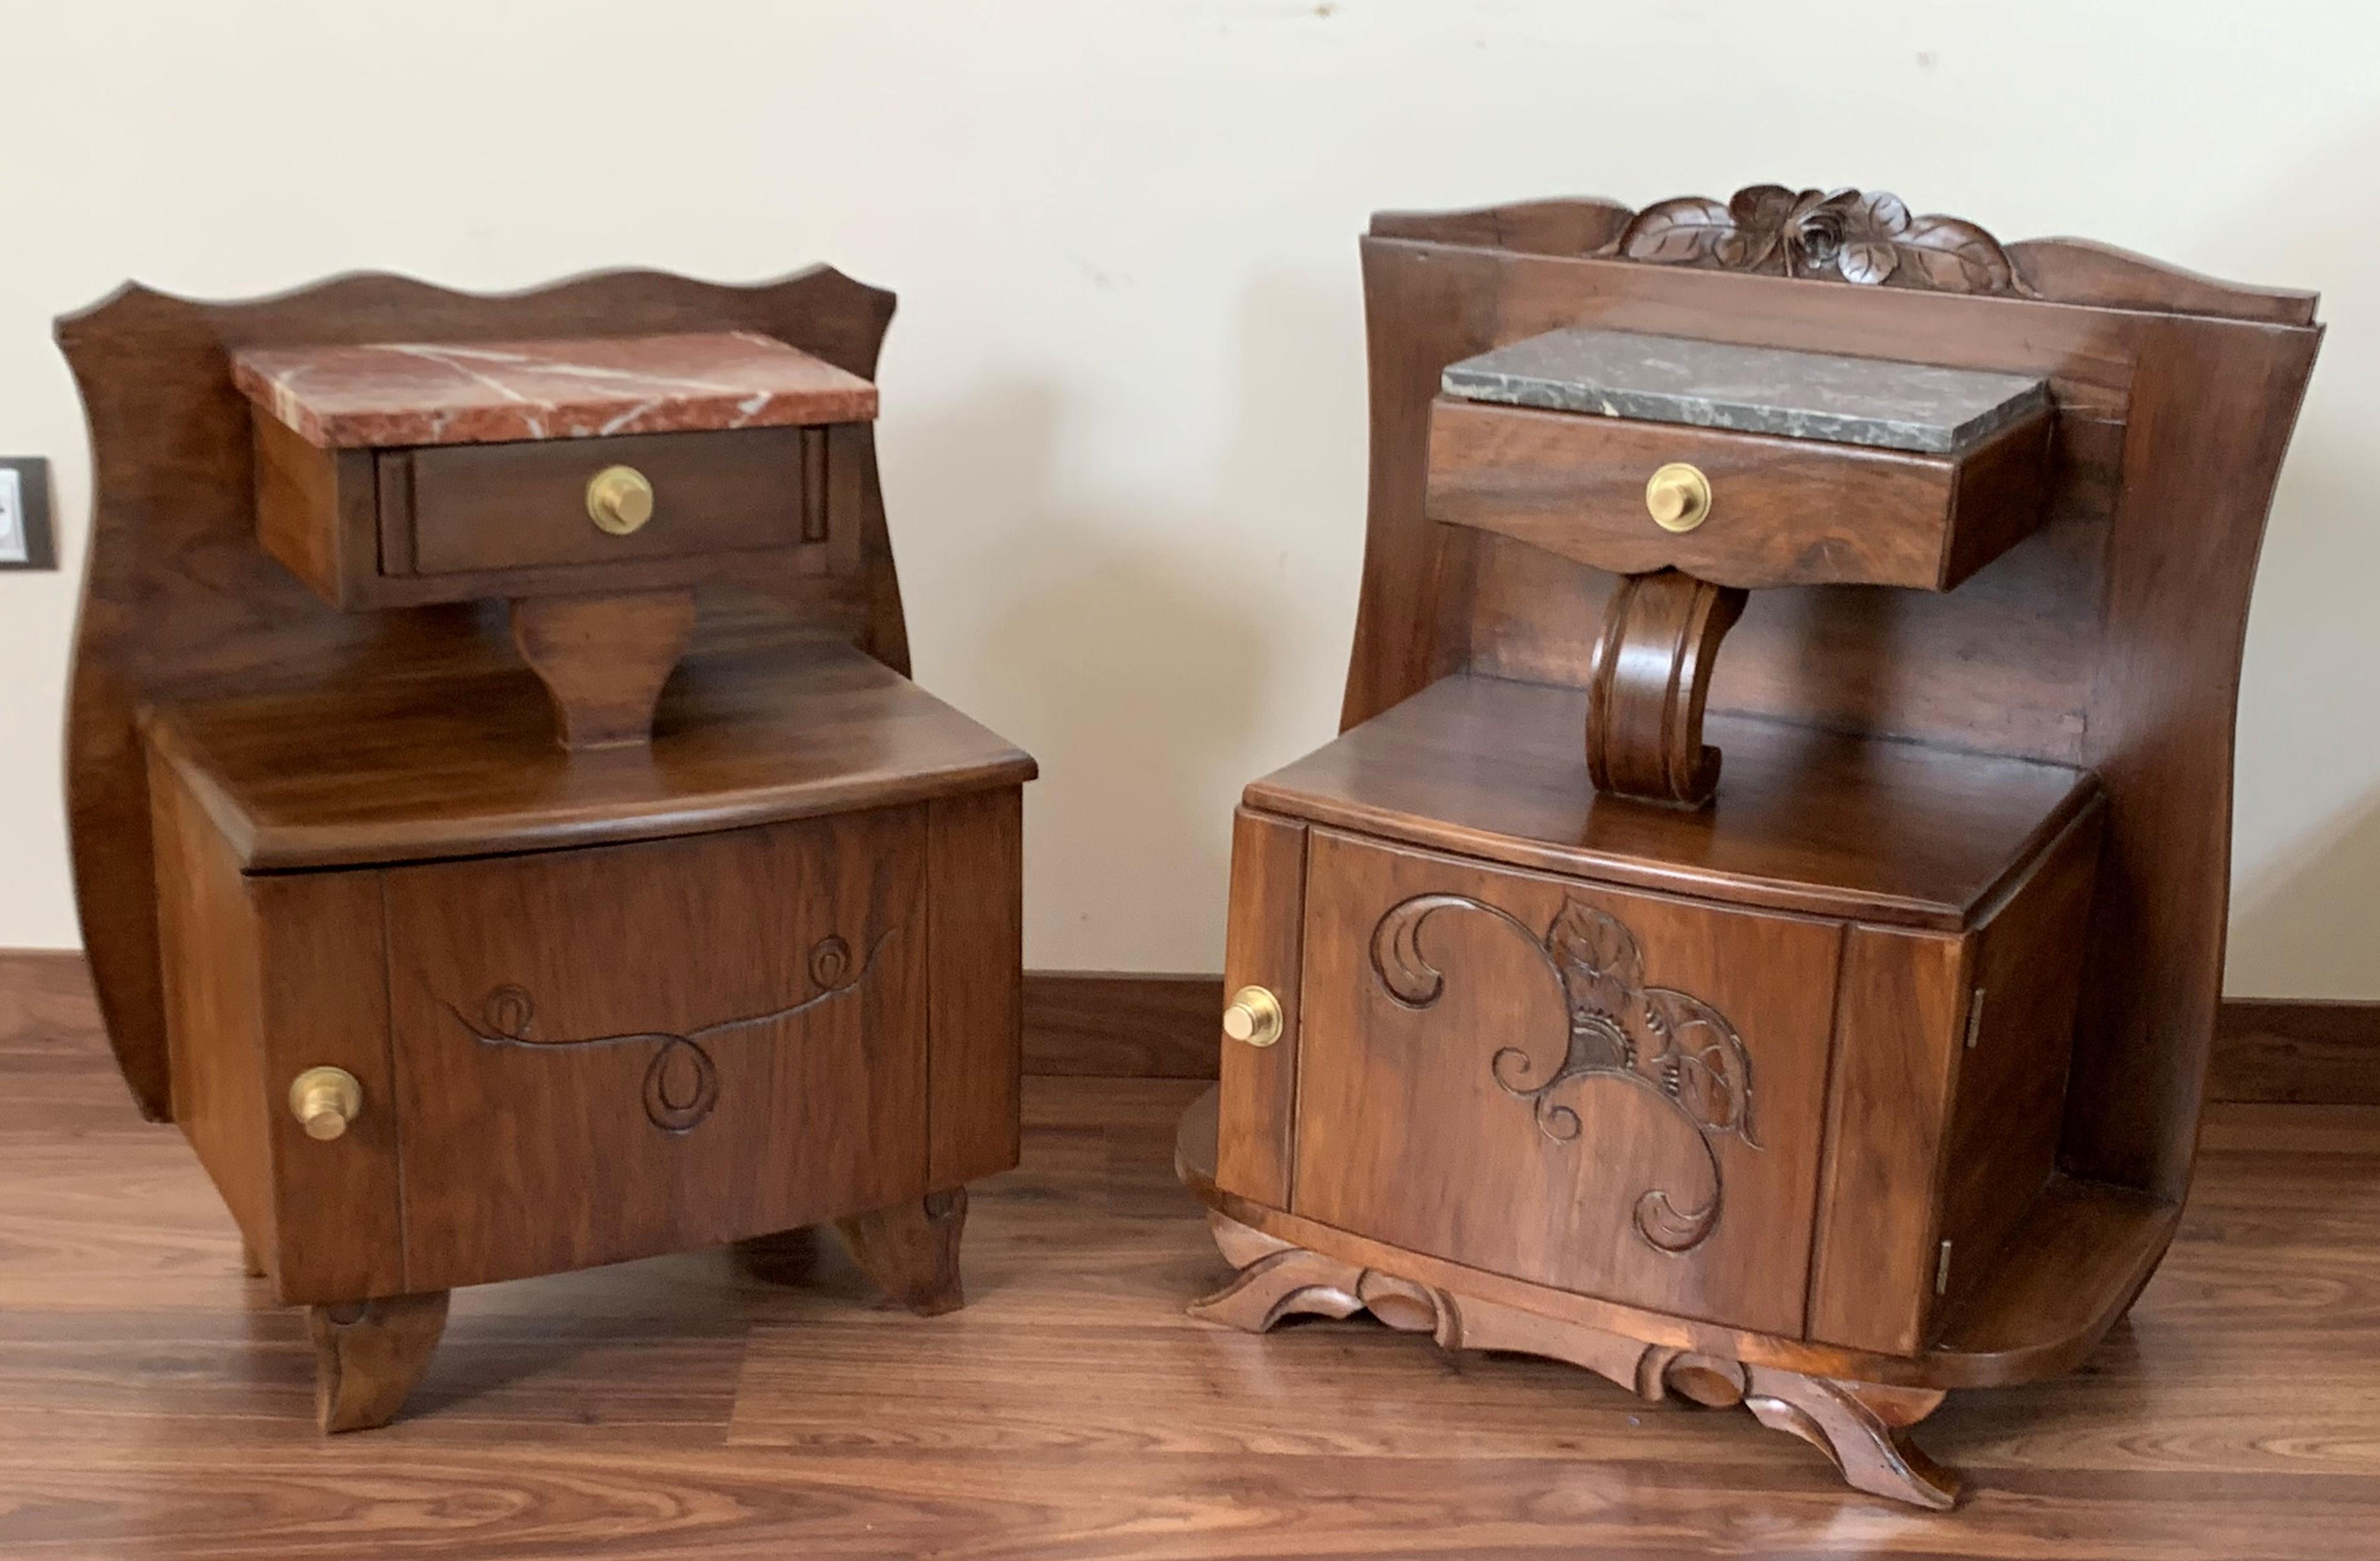 Art Nouveau Carved Nightstands / Bedside Tables with Marble Top, circa 1900 In Good Condition For Sale In Miami, FL